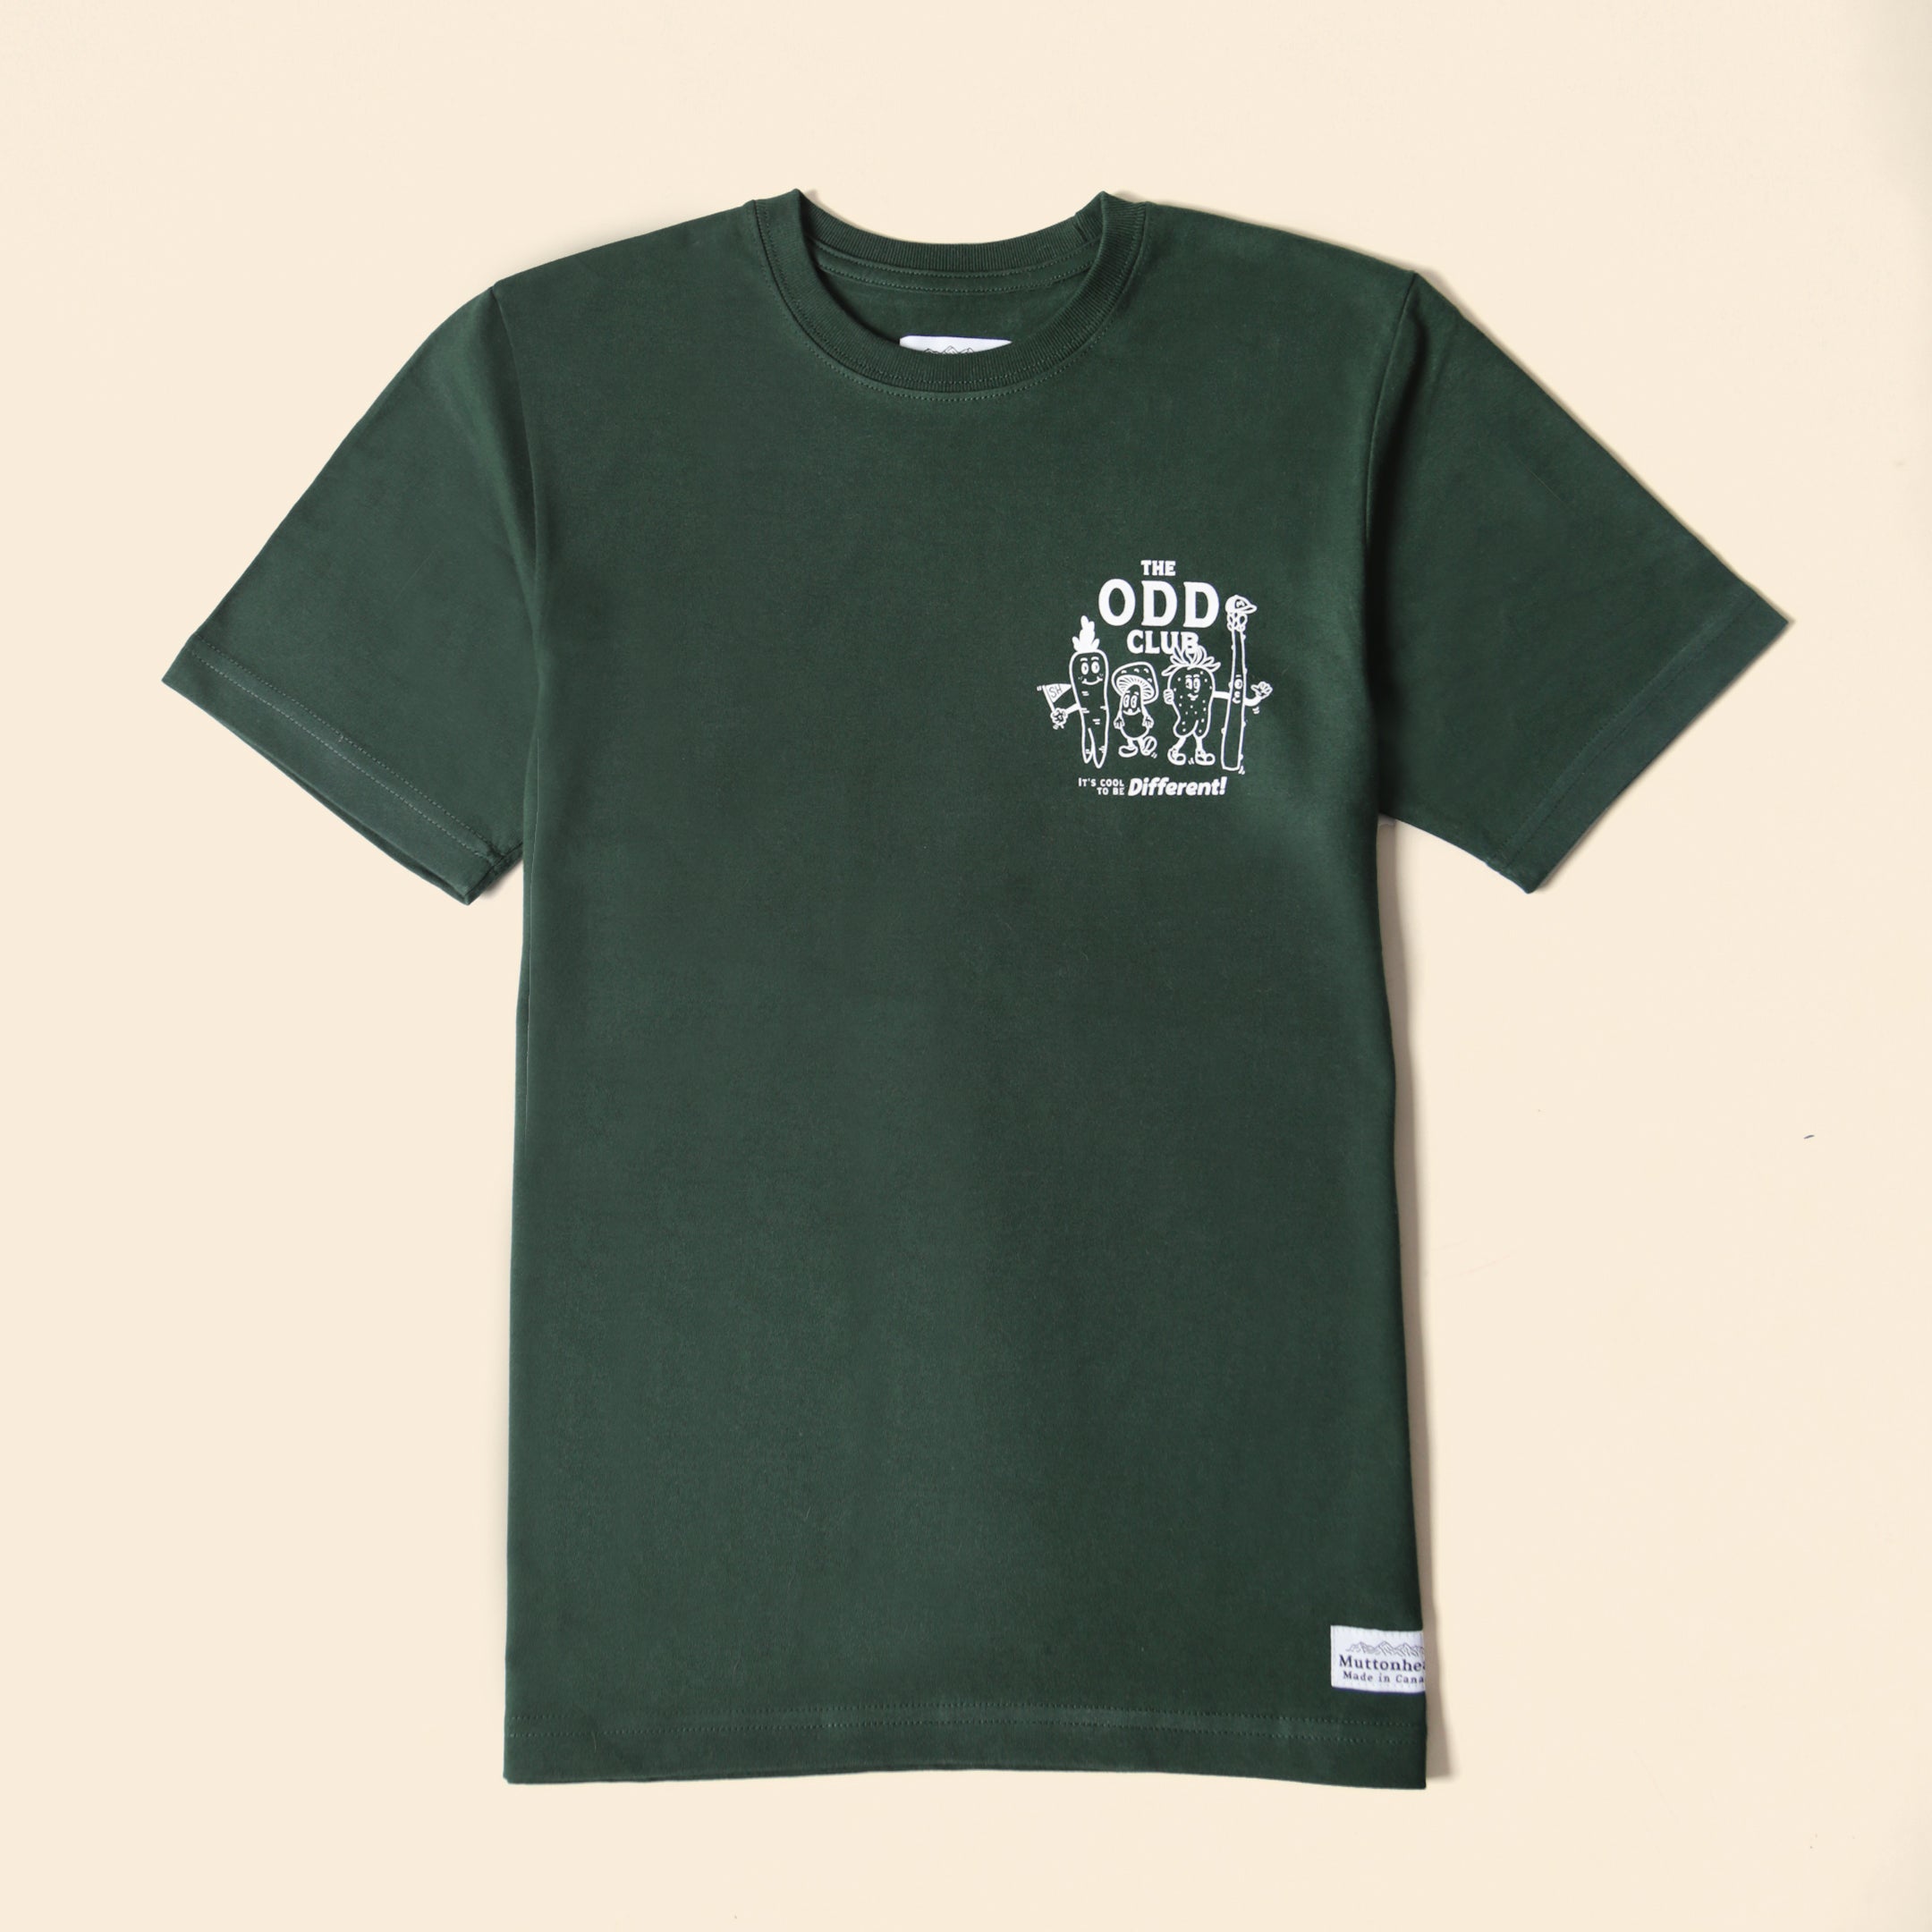 Heavy Weight Tee - Forest - The Odd Club - Second Harvest Series